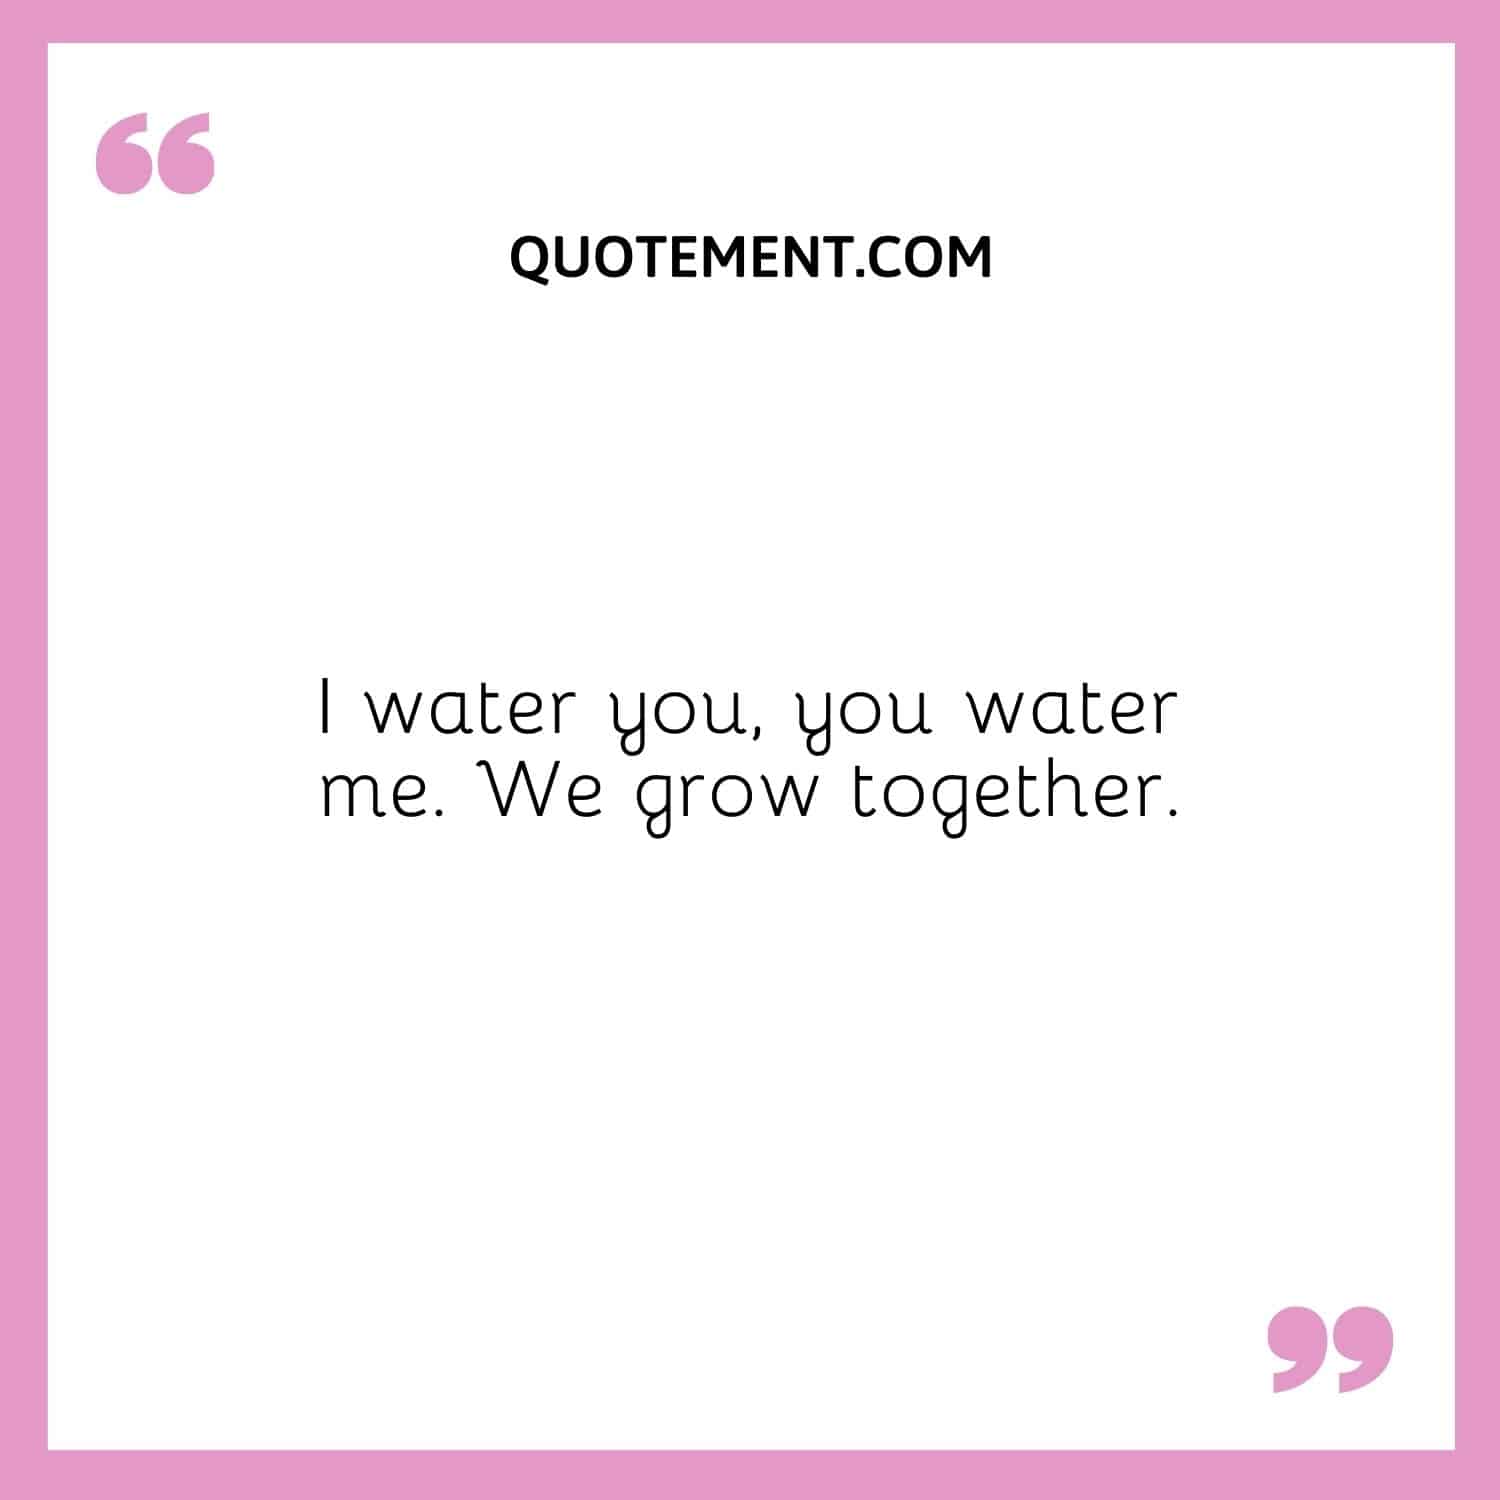 I water you, you water me. We grow together.